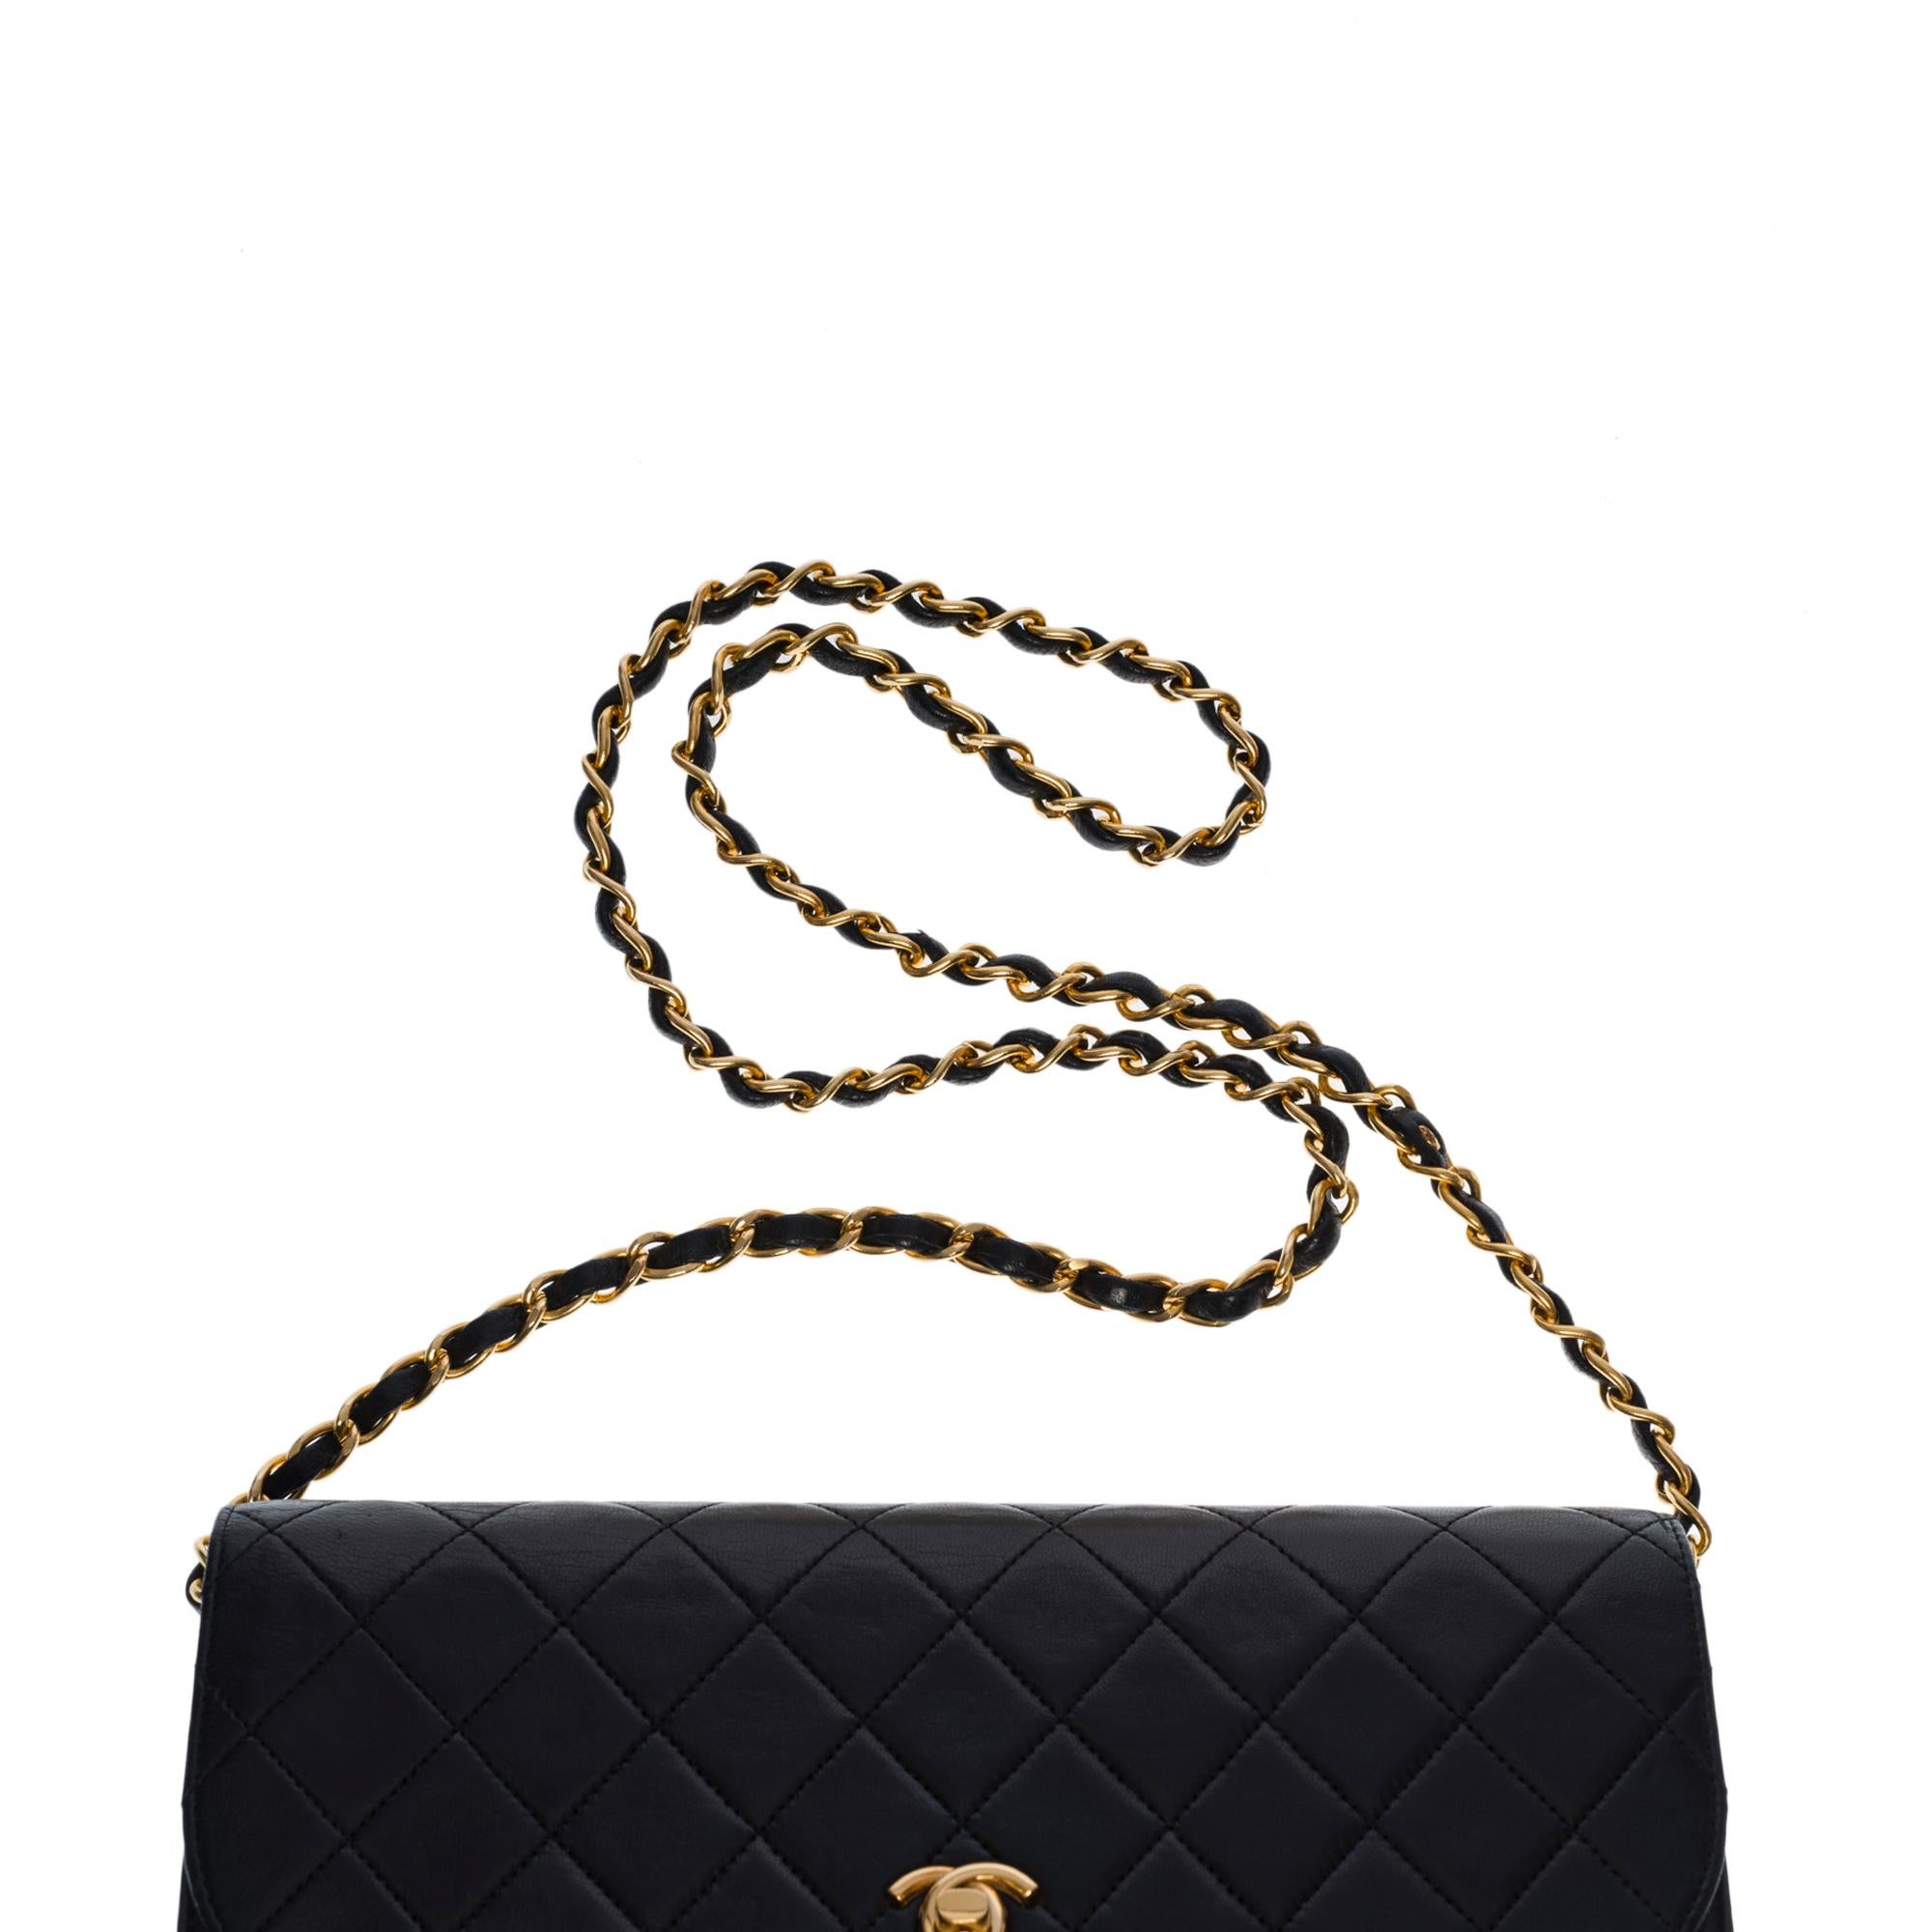 Chanel Classic Demi-Lune shoulder Flap bag in black quilted leather, GHW 3